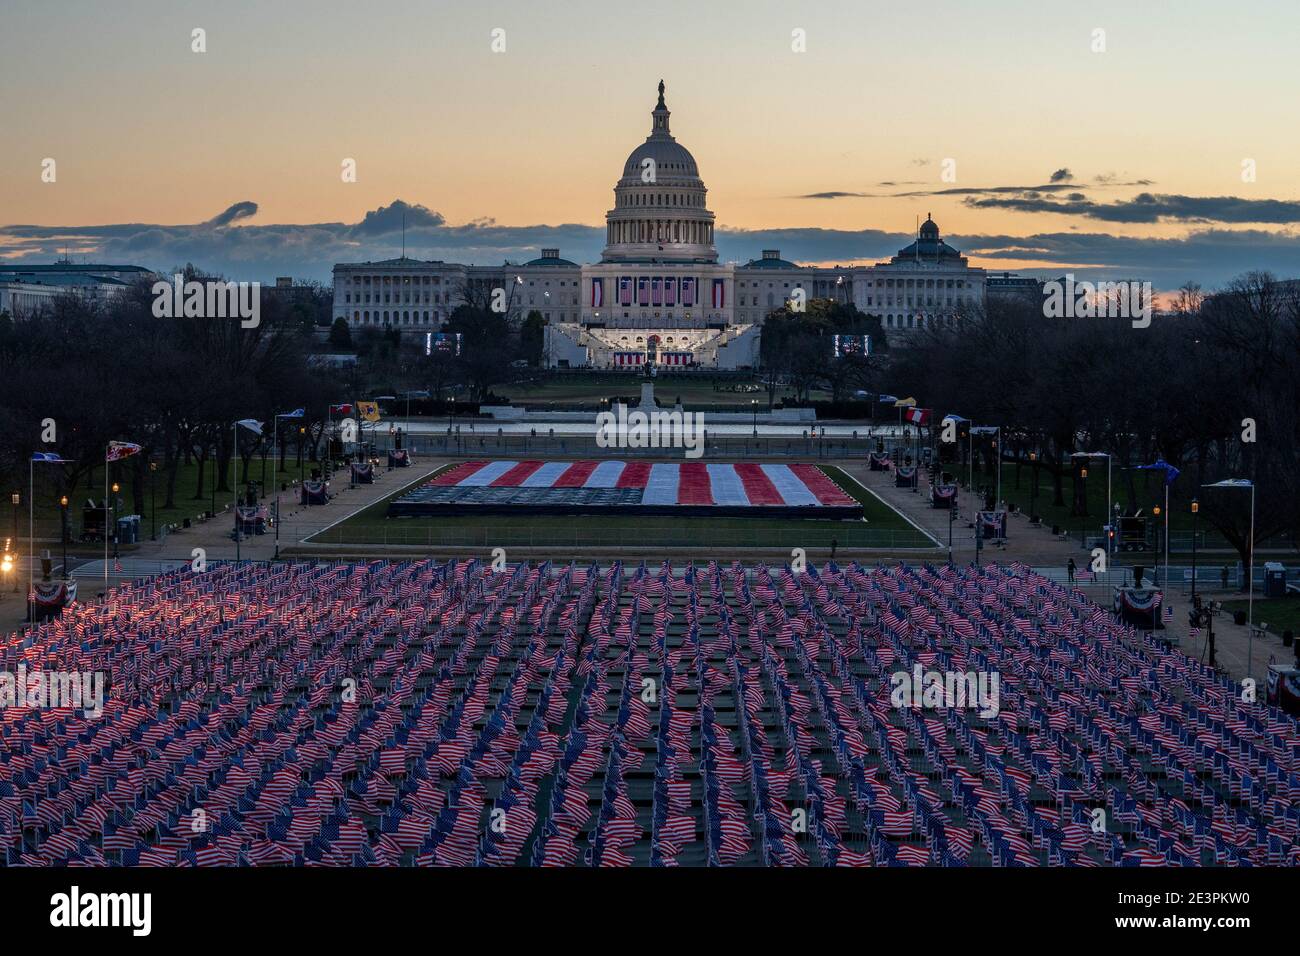 Washington, United States. 20th Jan, 2021. The U.S. Capitol is viewed from the National Mall in Washington, DC on Wednesday, January 20, 2021. Joseph Biden will be sworn in as the 46th President of the United States today. Photo by Ken Cedeno/UPI Credit: UPI/Alamy Live News Stock Photo